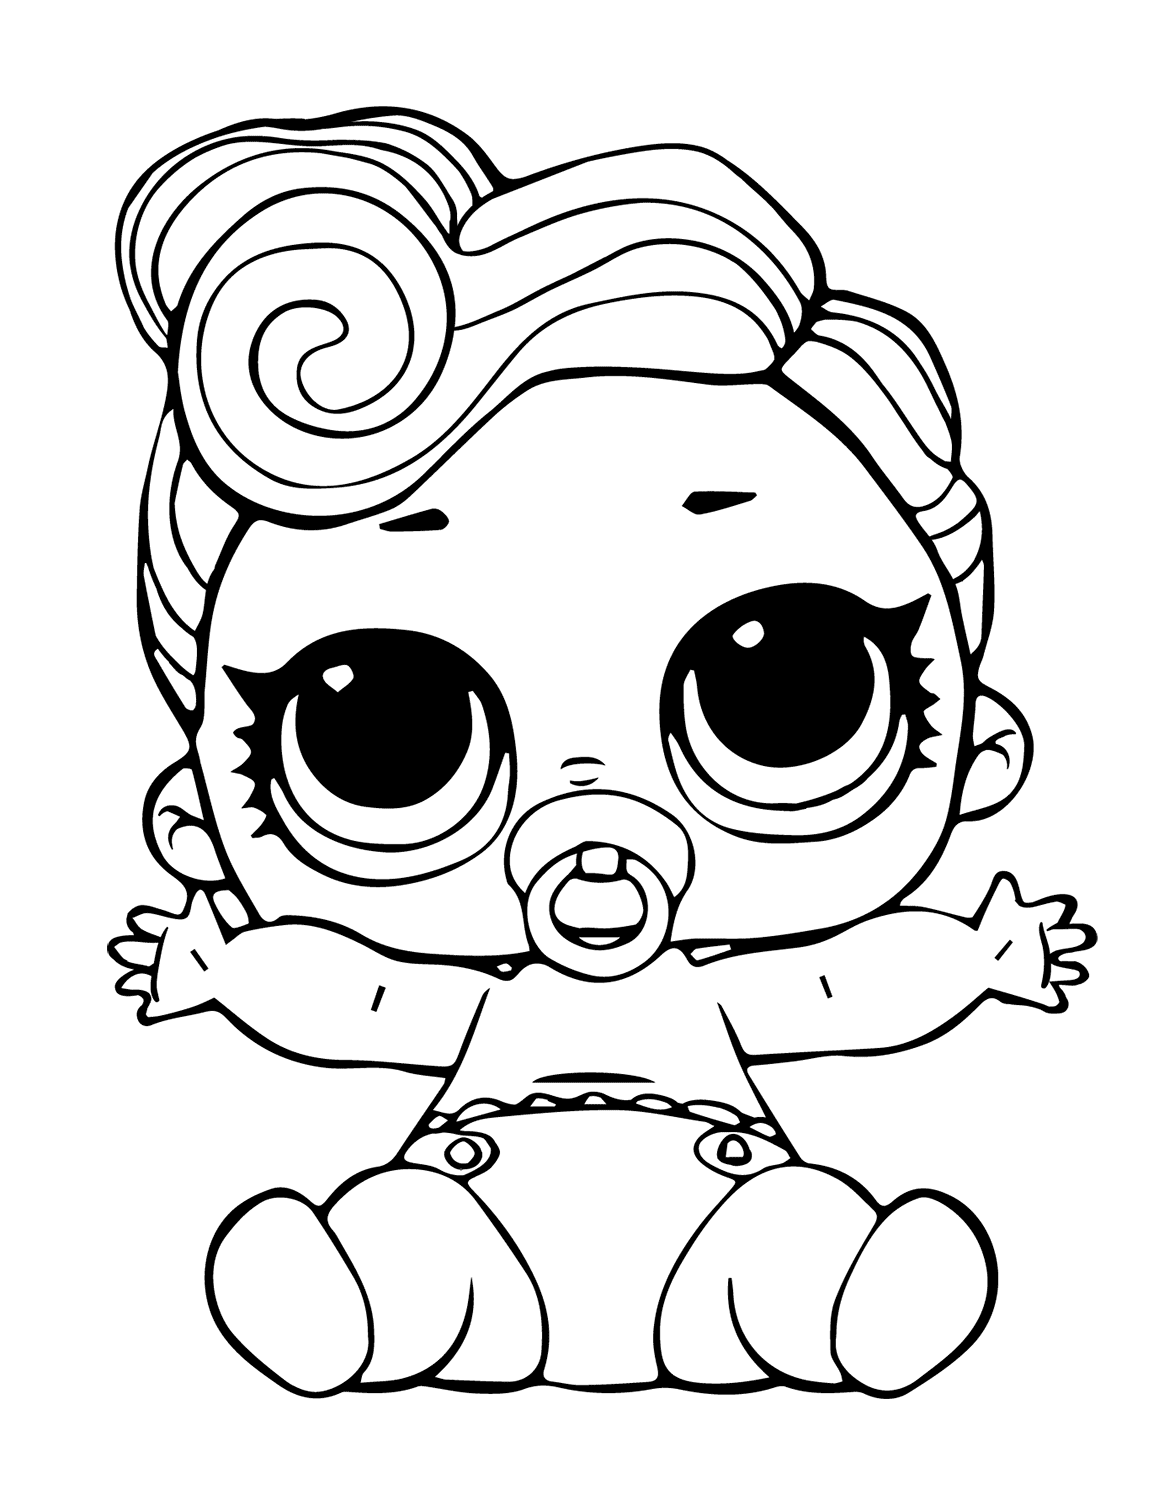 The Lil Queen Lol Doll Coloring Page - Free Printable ...